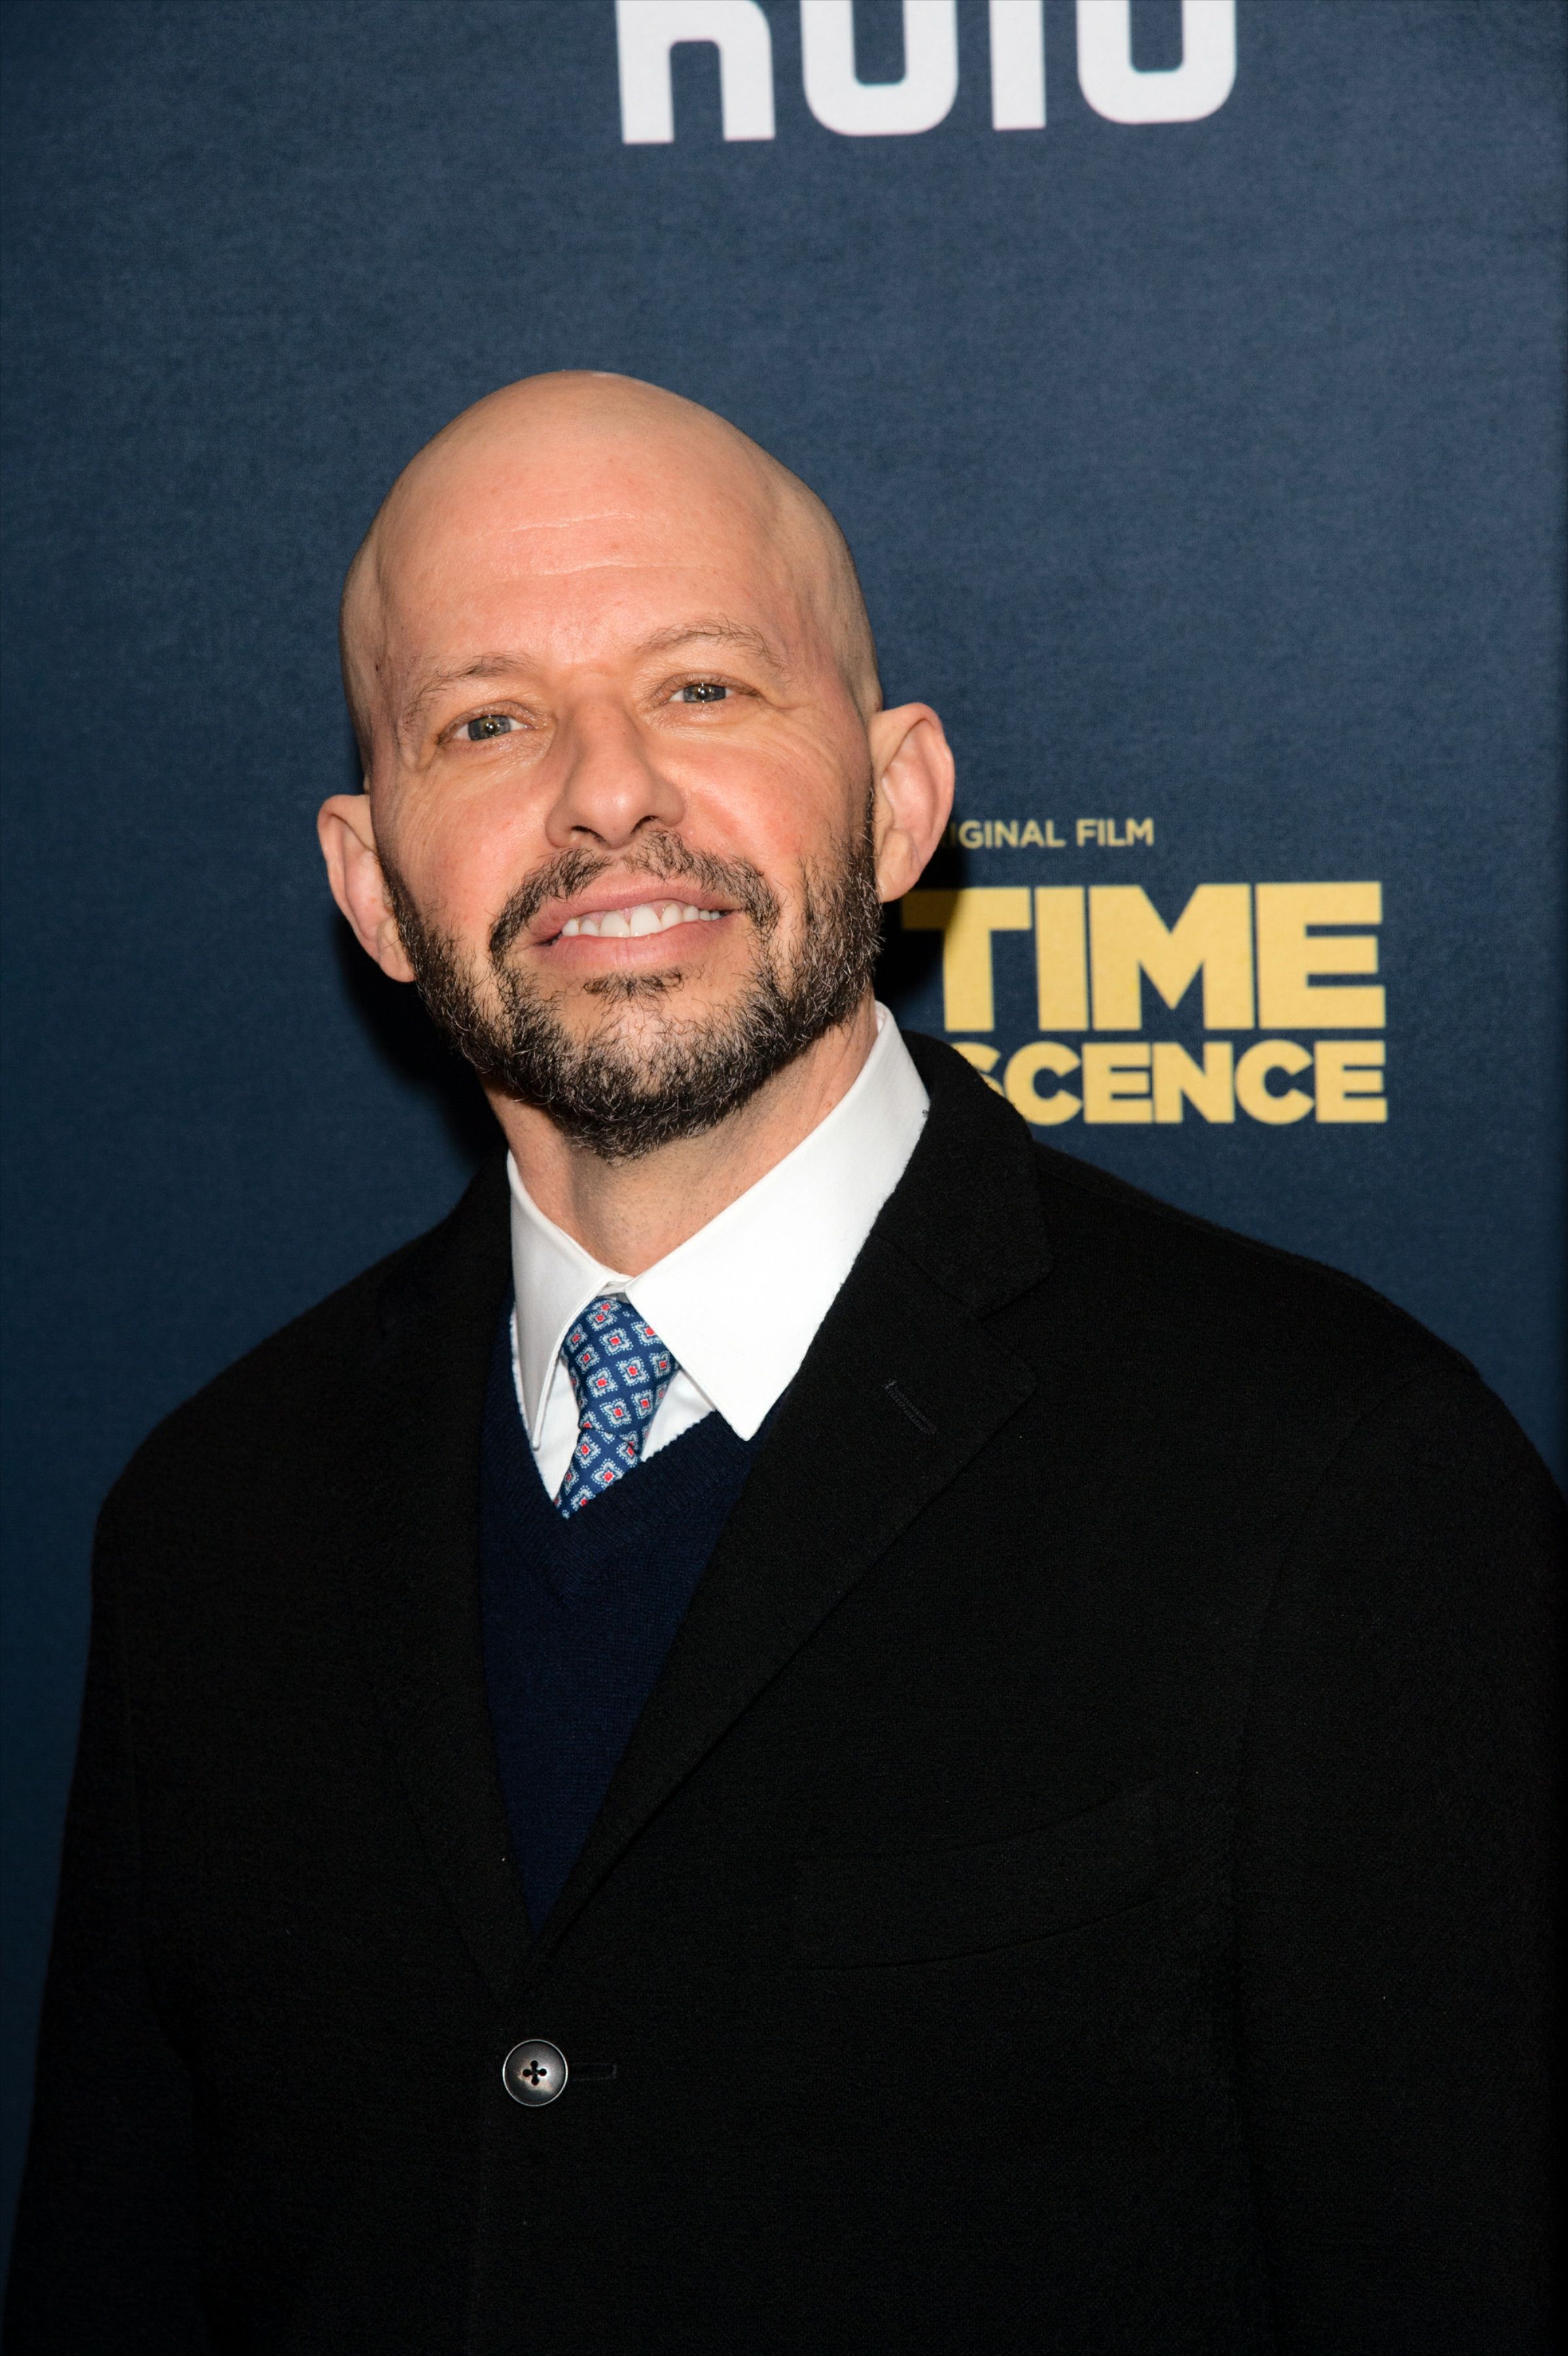 Did Two and a Half Men ruin Jon Cryer's career?